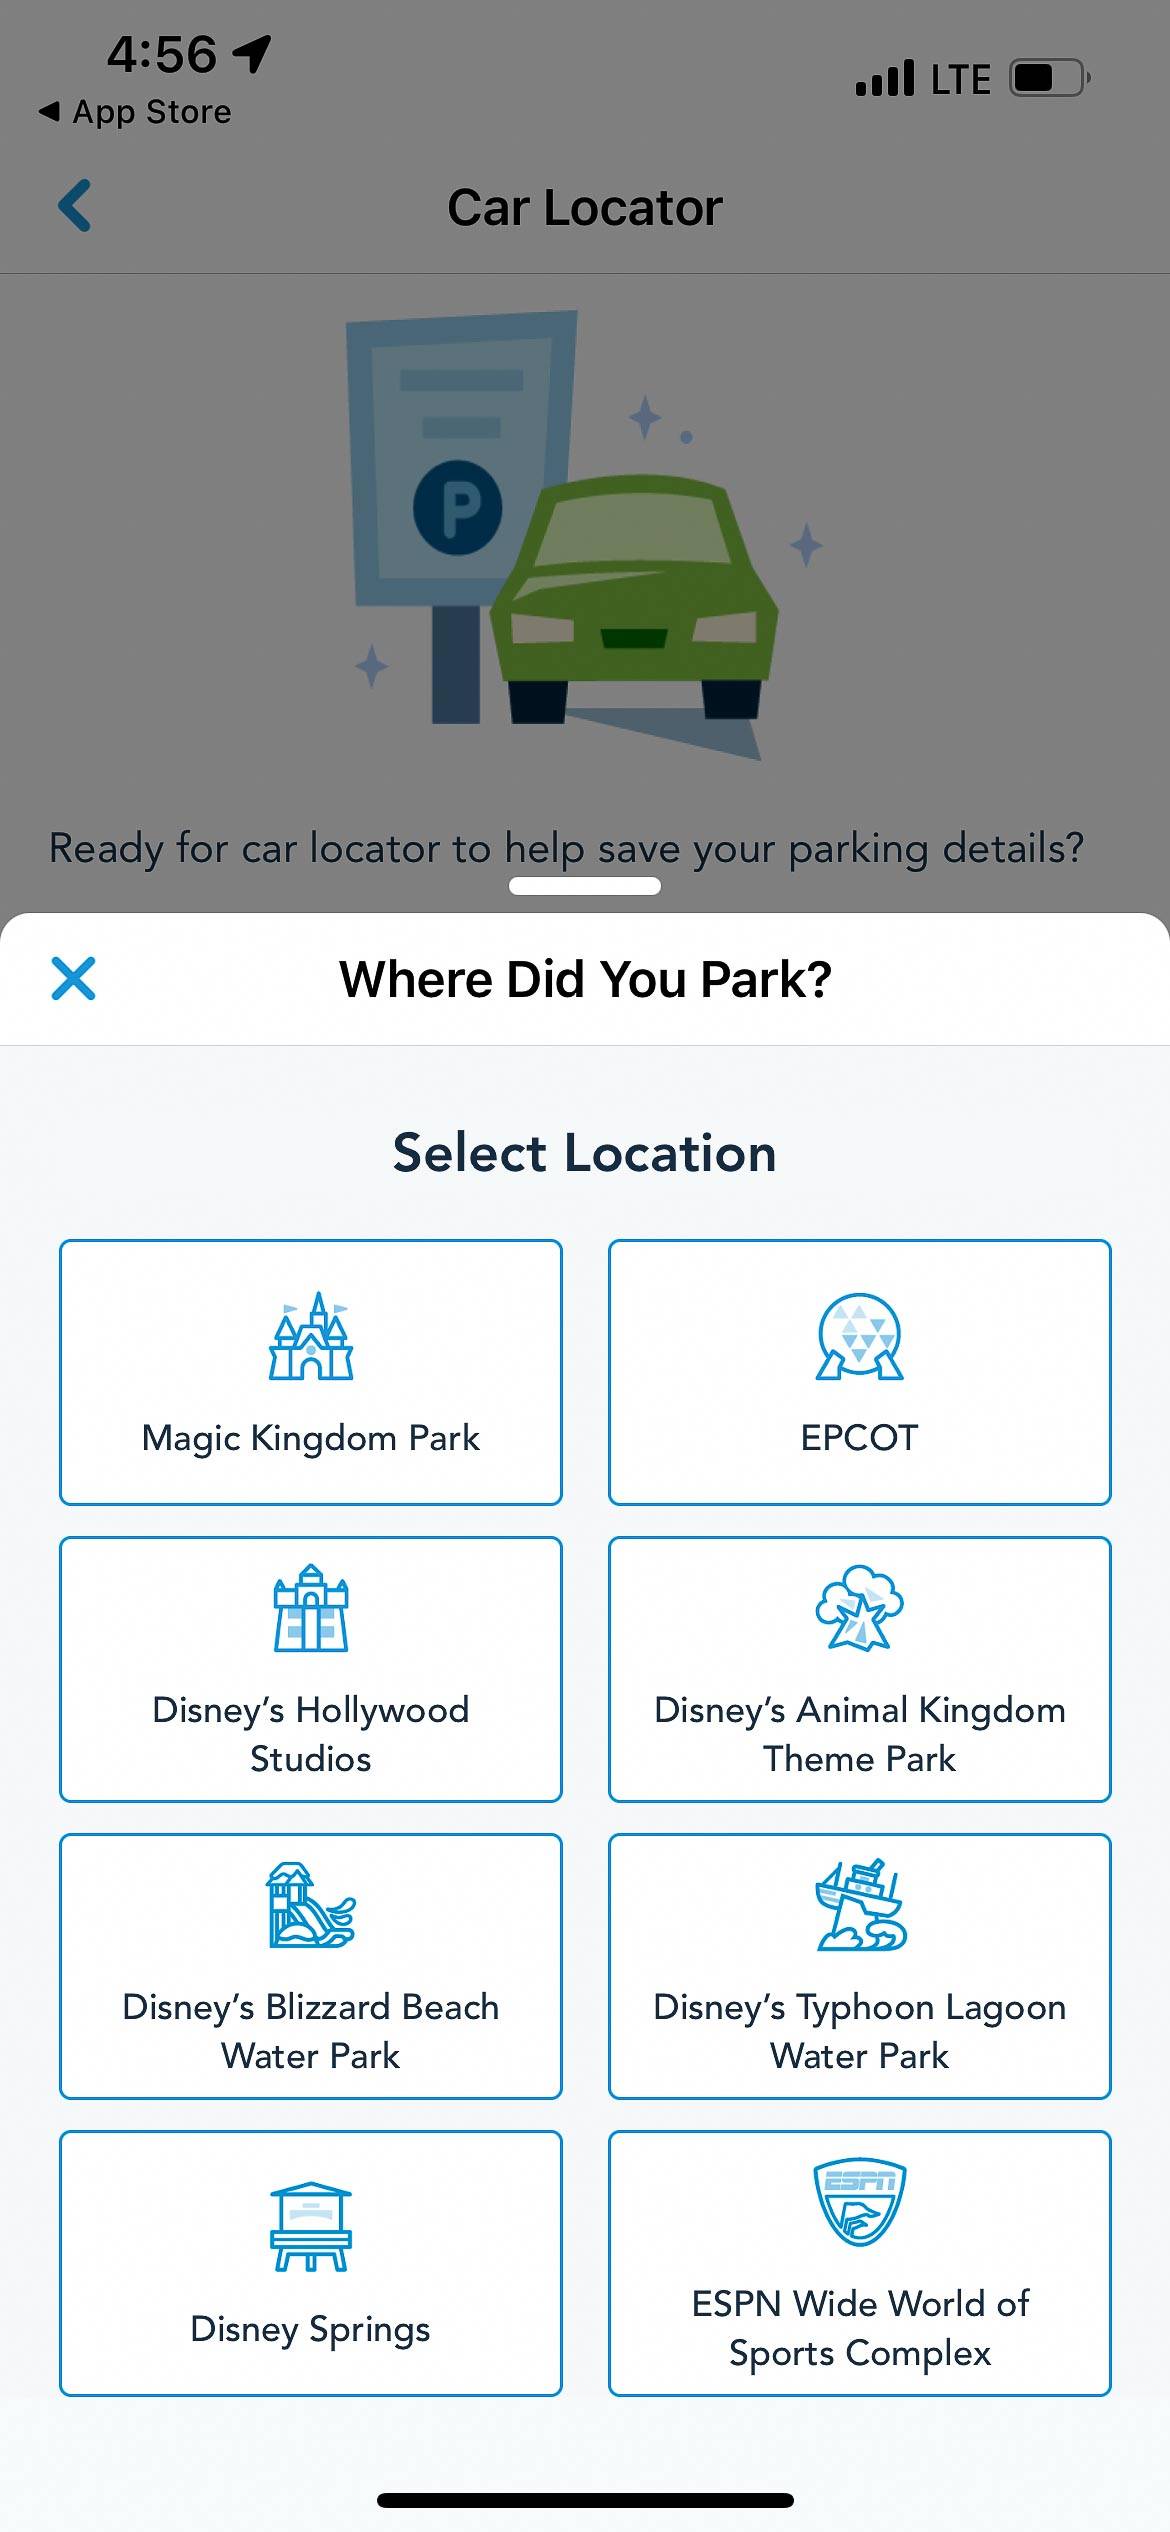 'My Disney Experience' Car Locator feature now available at Walt Disney World